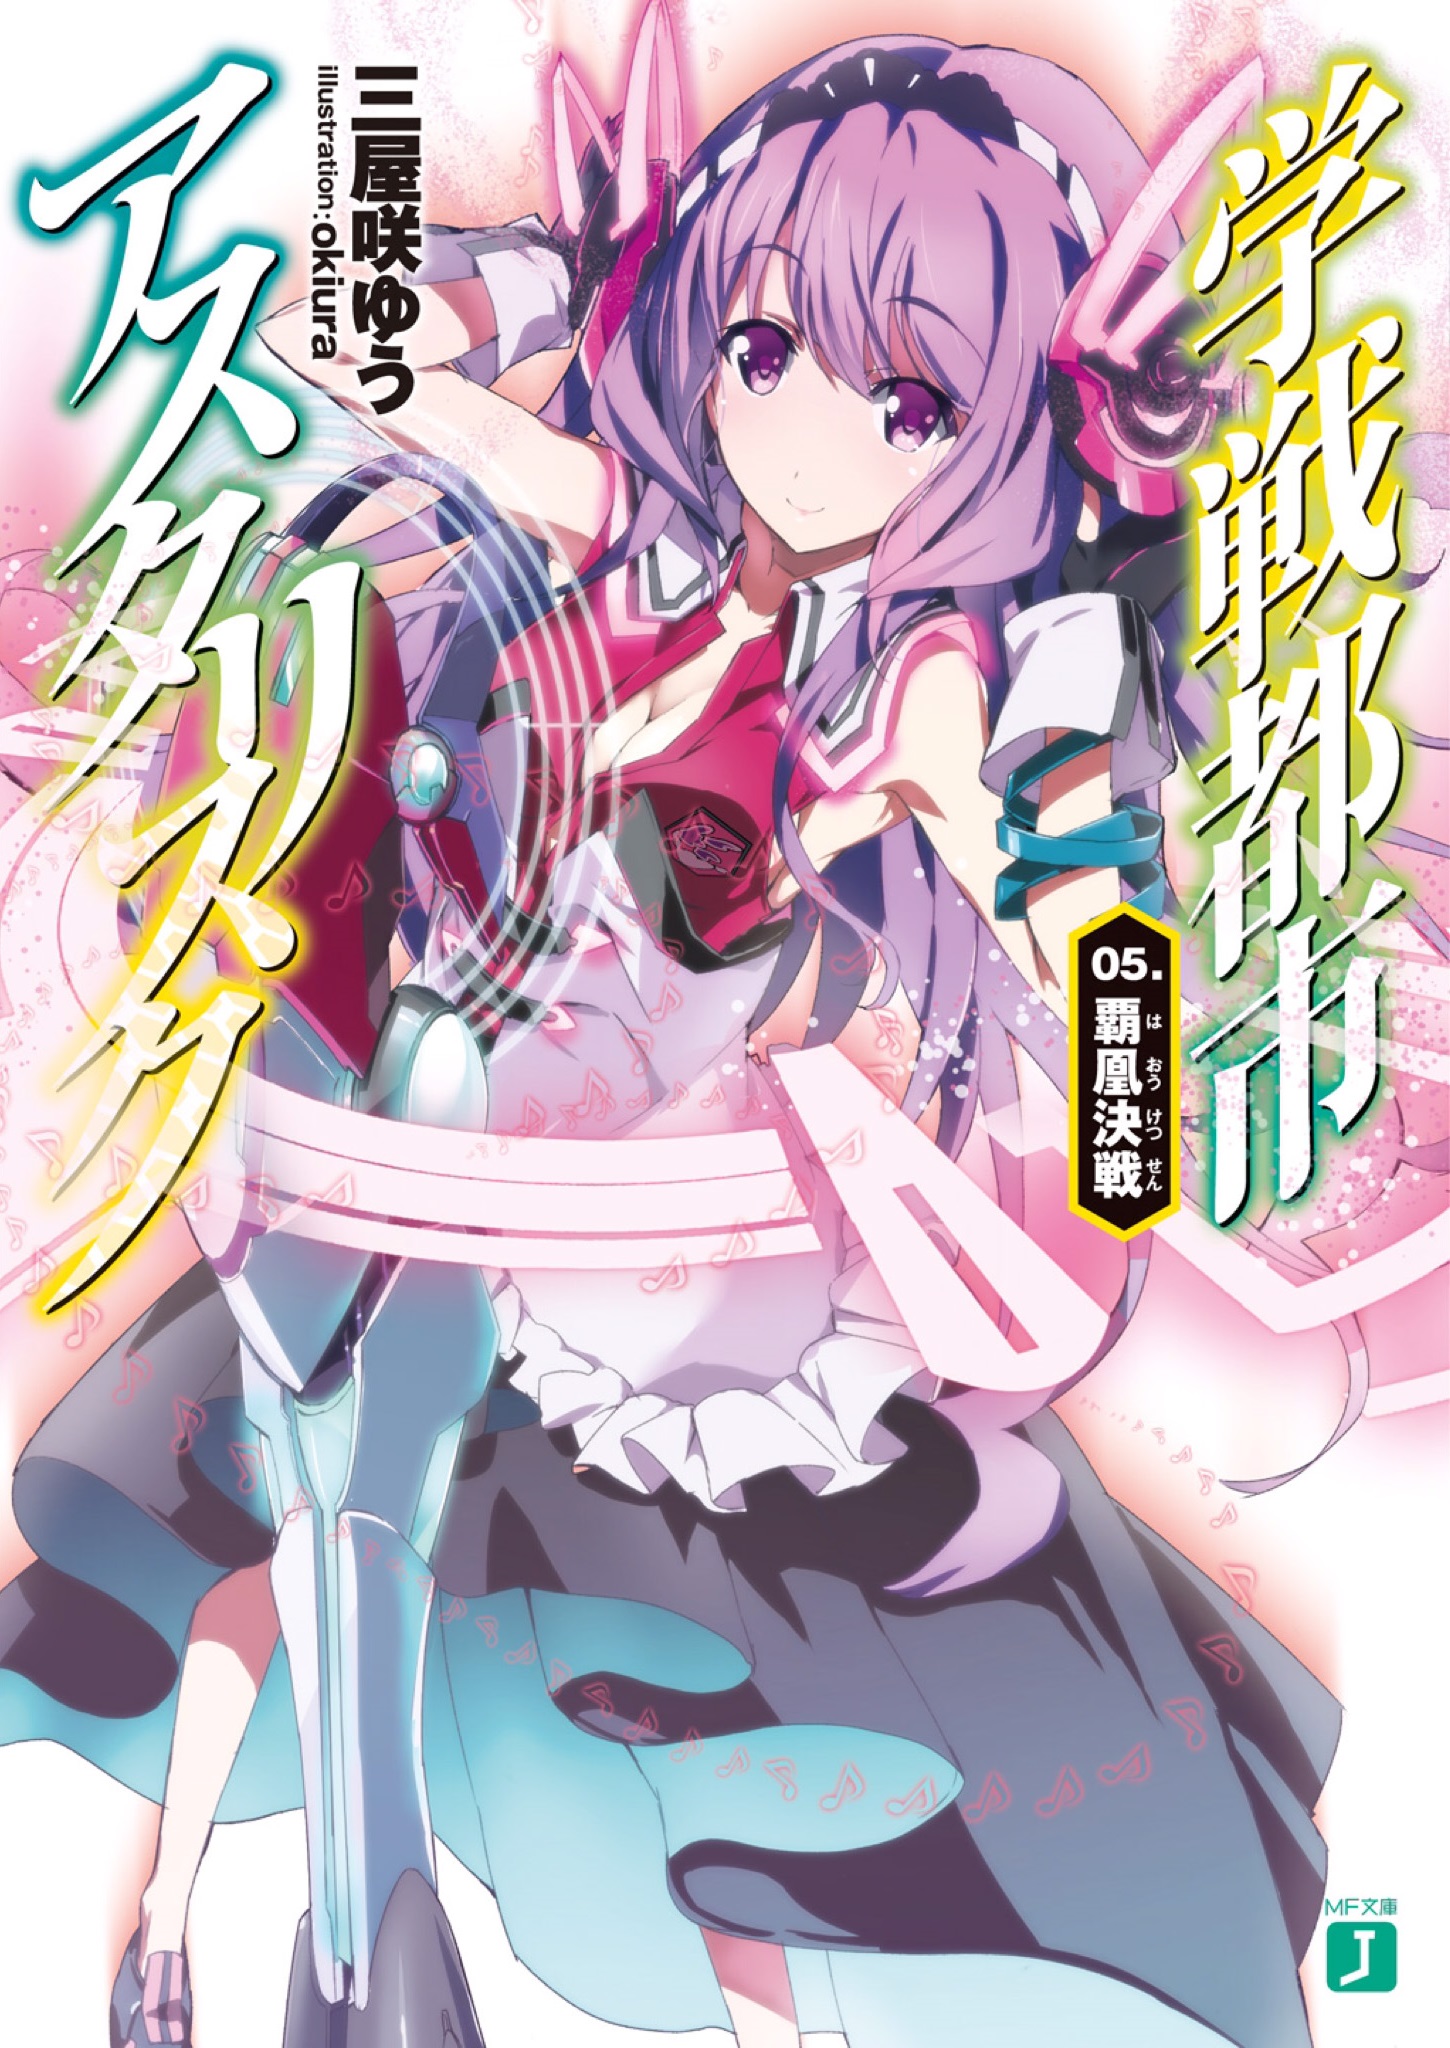 Wings of Queenvail Chapter 1, Gakusen Toshi Asterisk Wiki